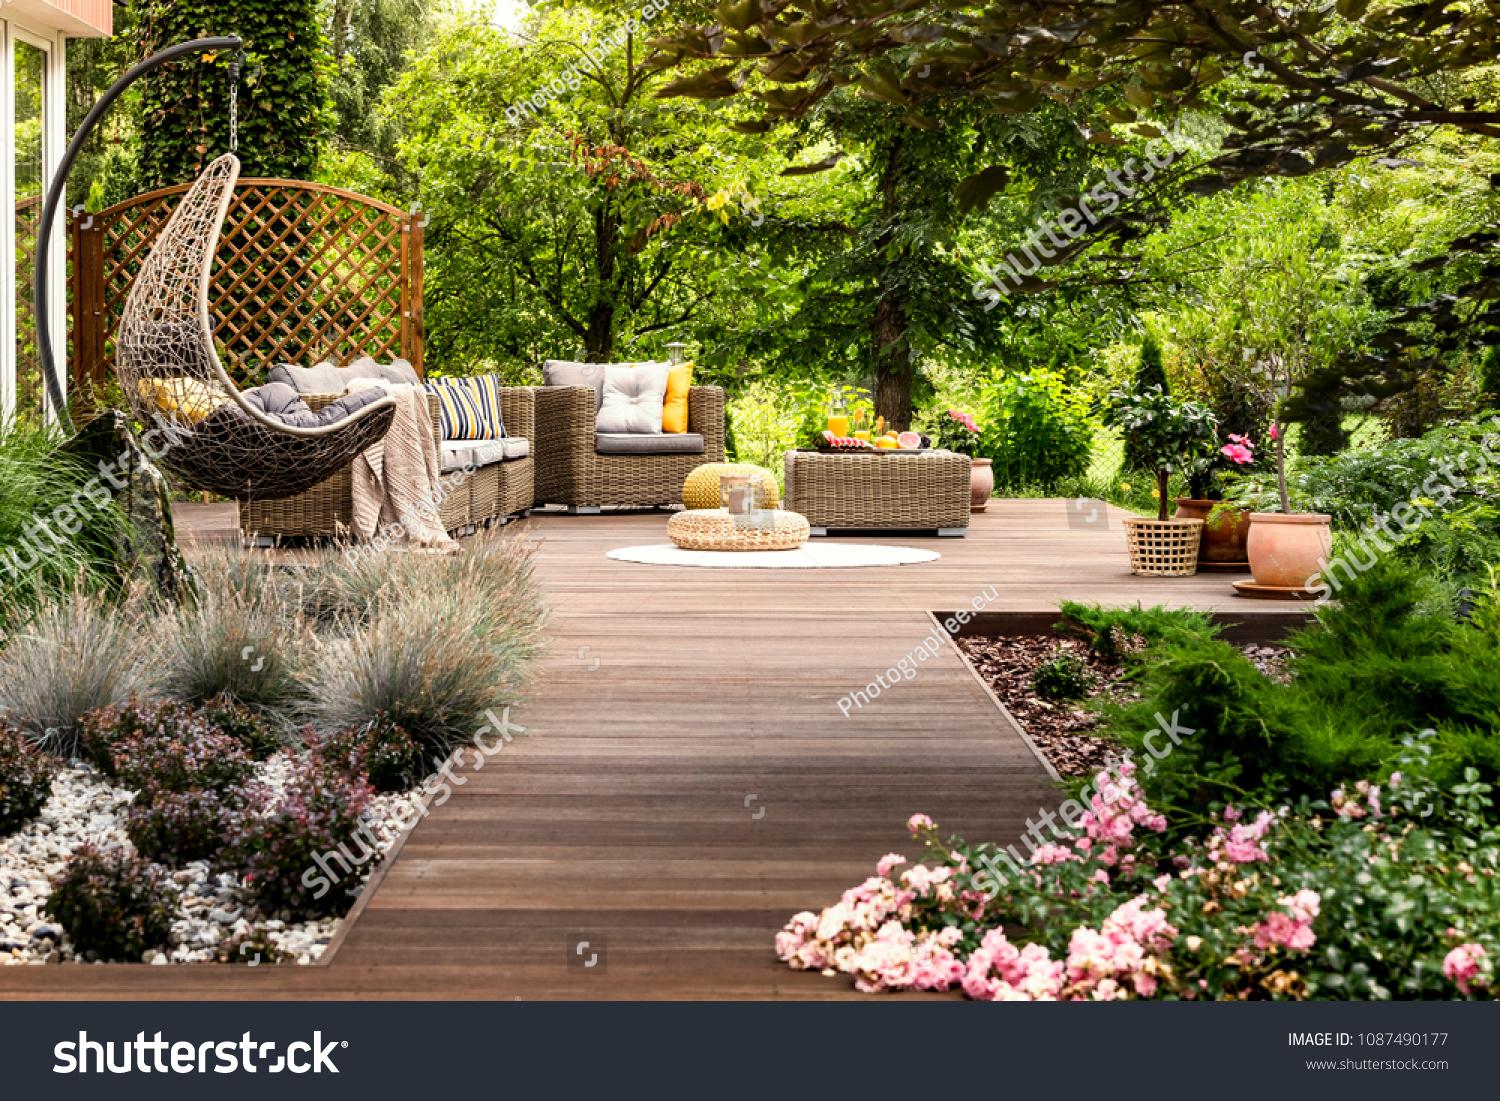 Beautiful wooden terrace with garden furniture surrounded by greenery on a warm, summer day #1087490177